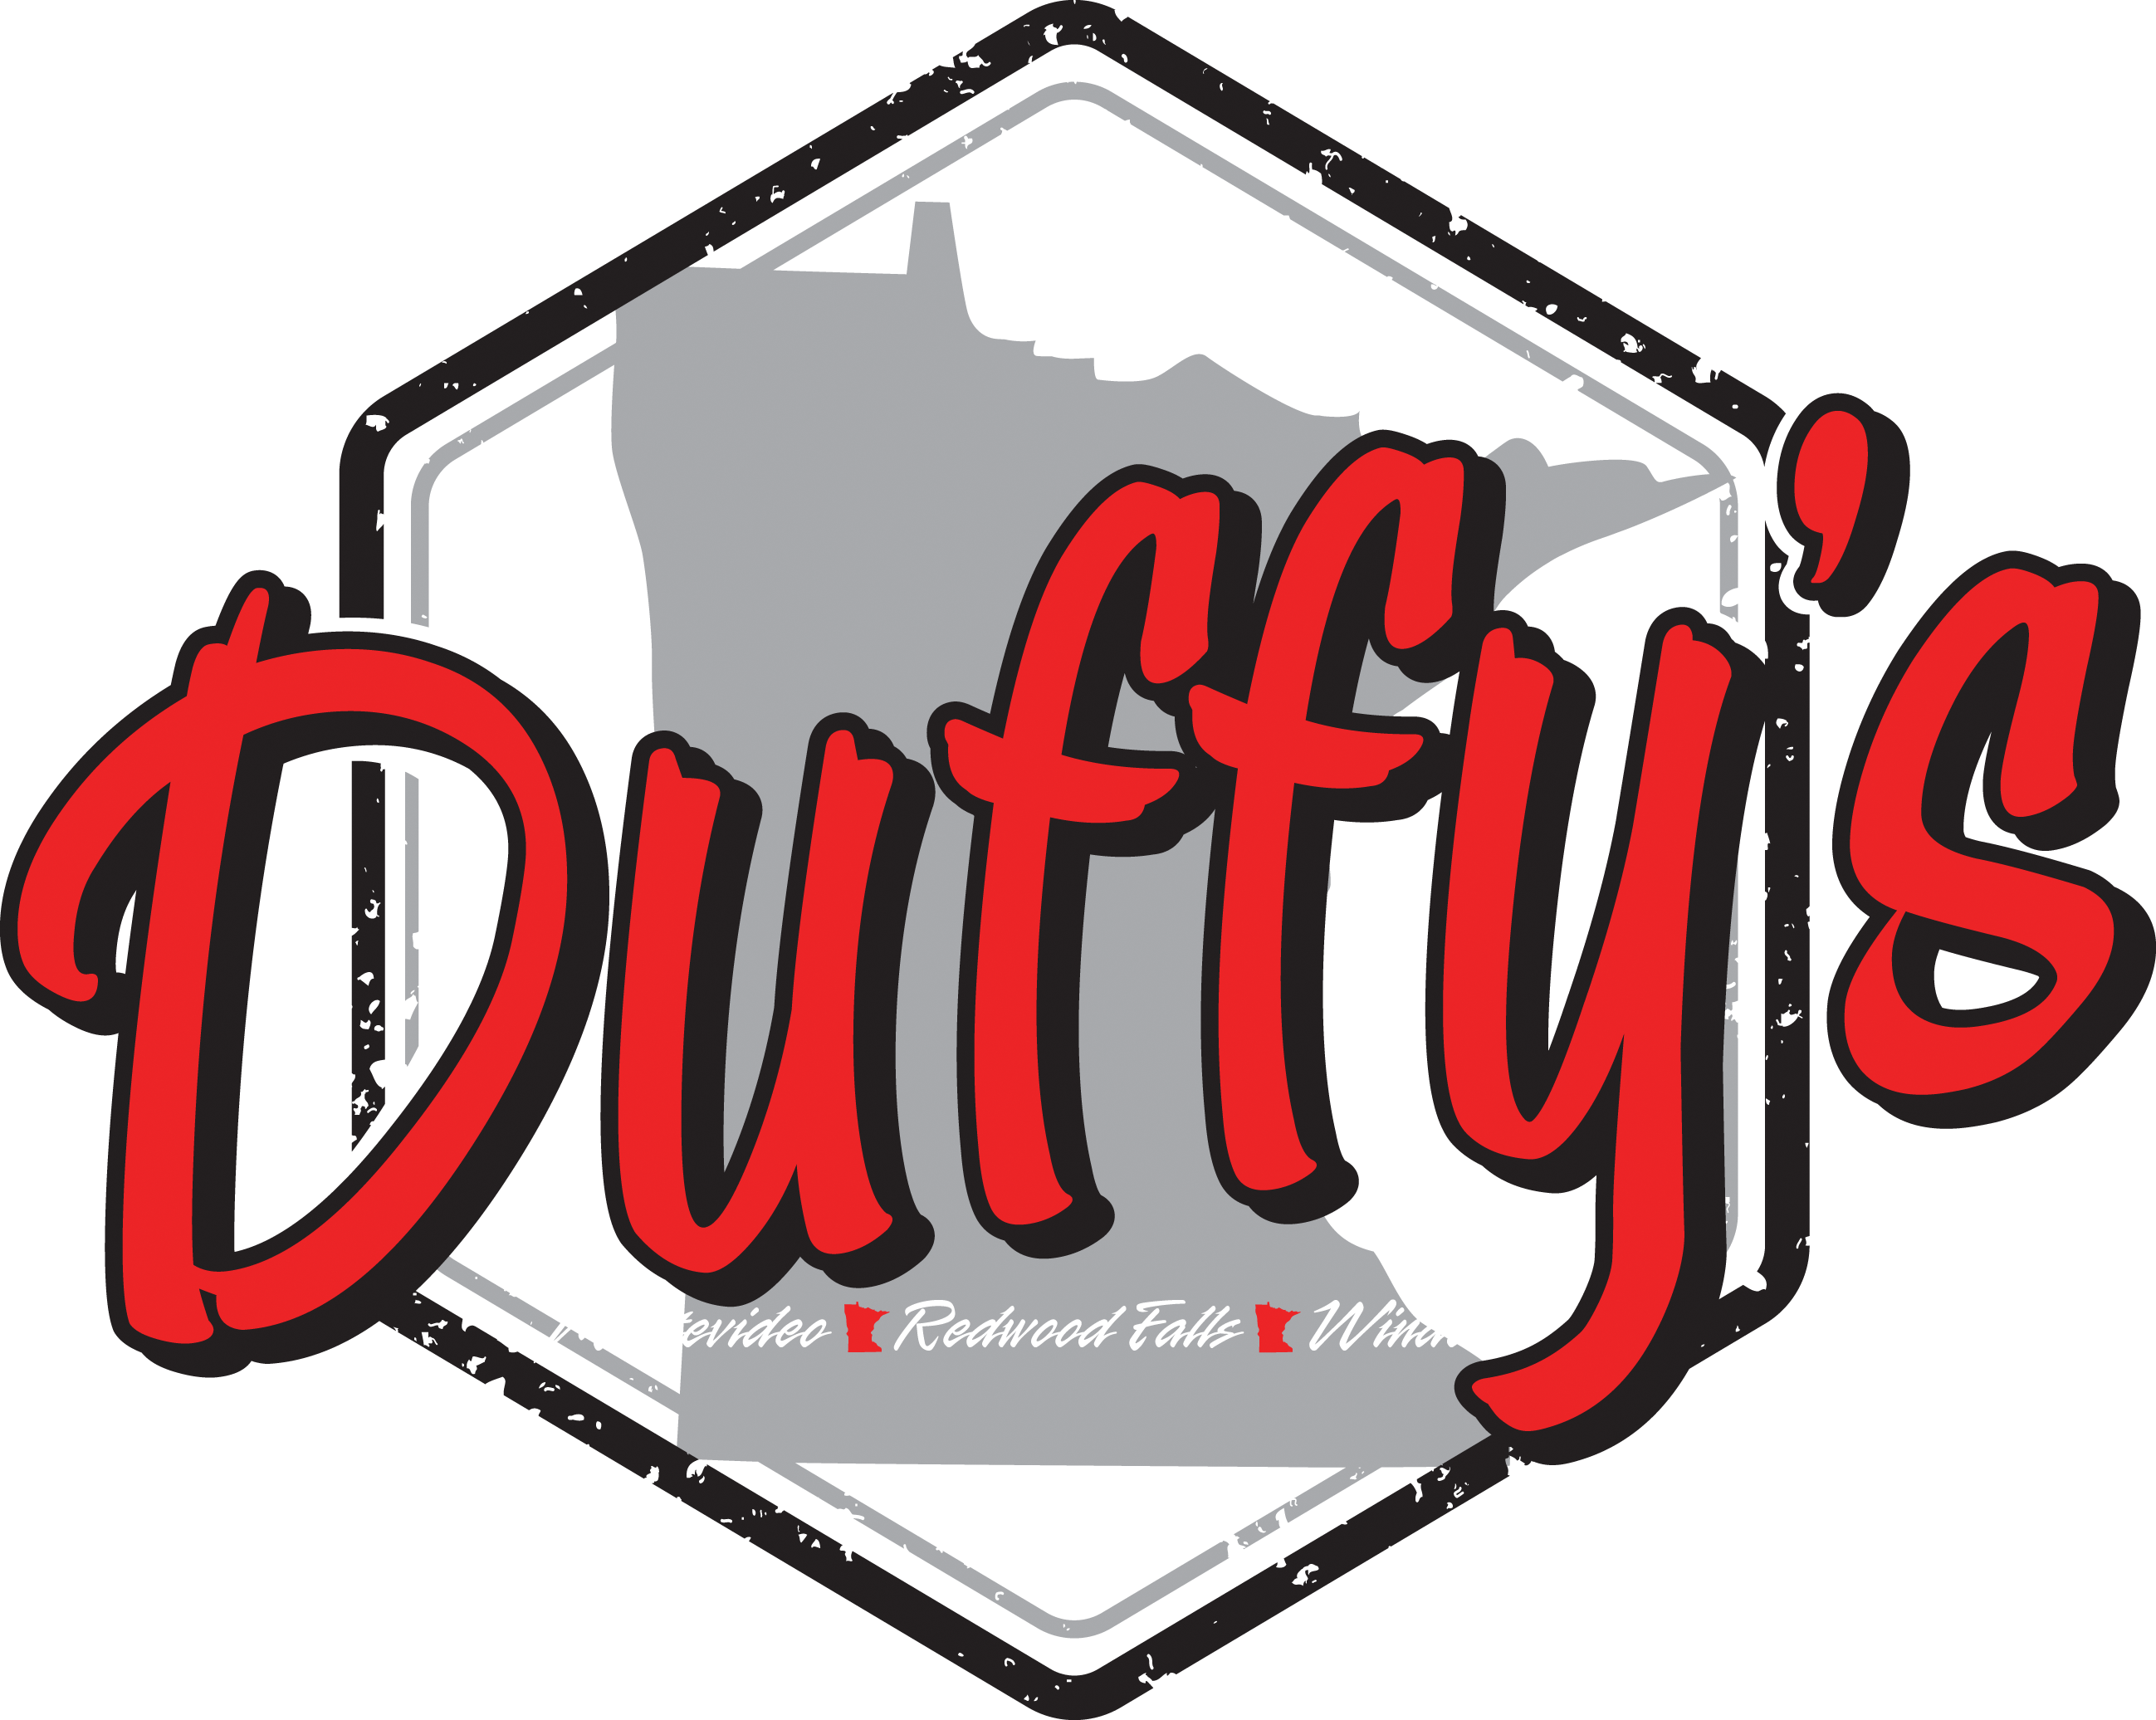 Duffy's Restaurant and Bar